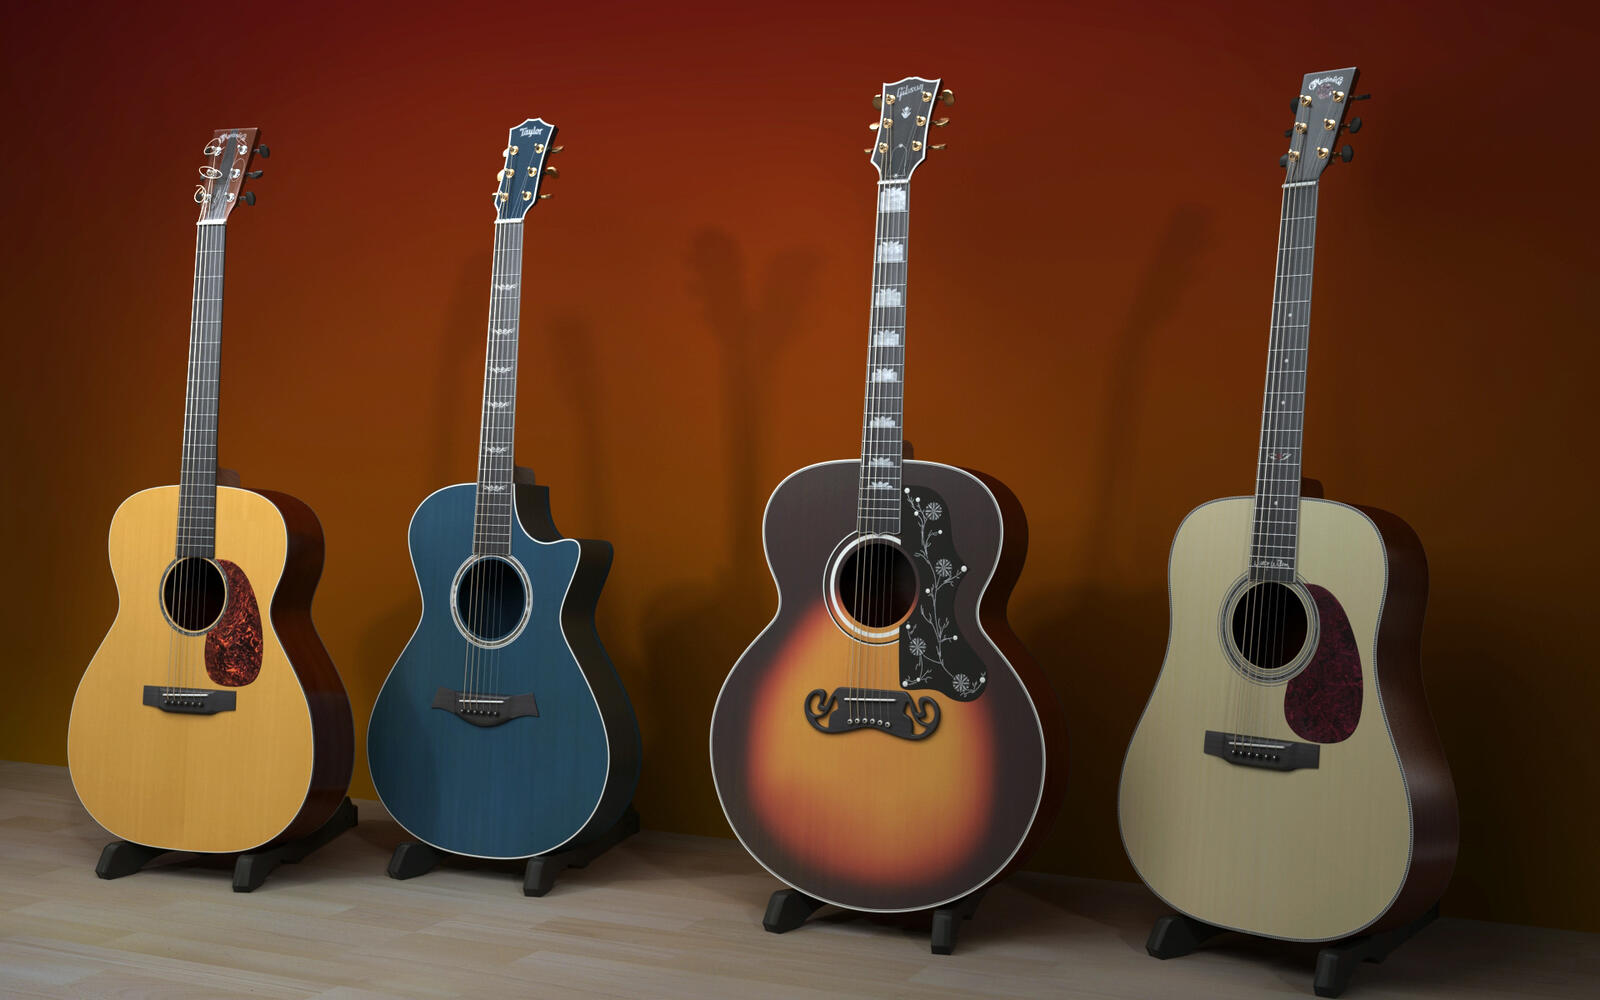 Wallpapers guitars acoustic different on the desktop